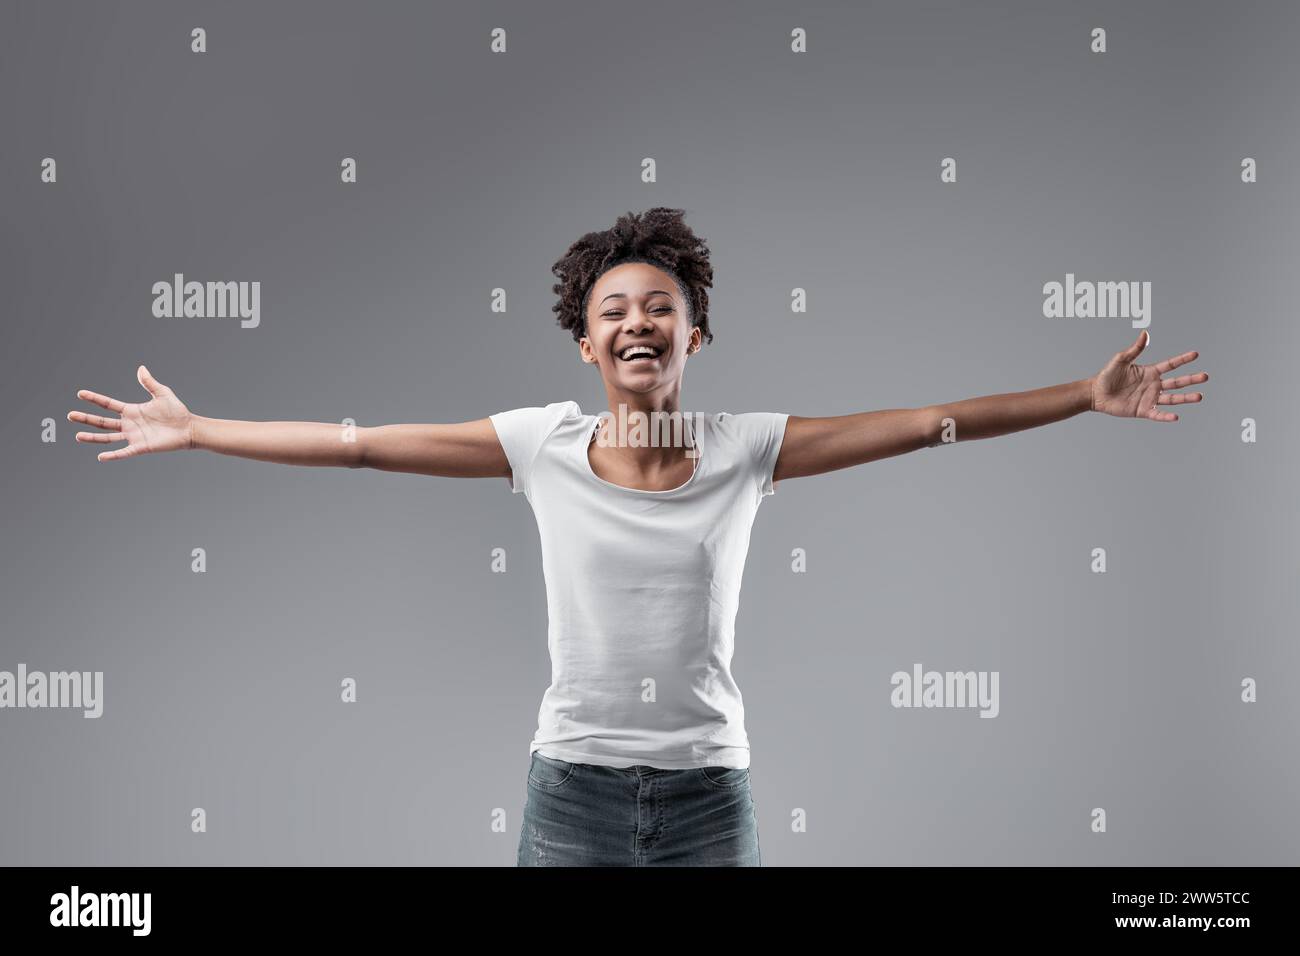 With open arms and a carefree smile, she presents a portrait of genuine happiness and openness Stock Photo